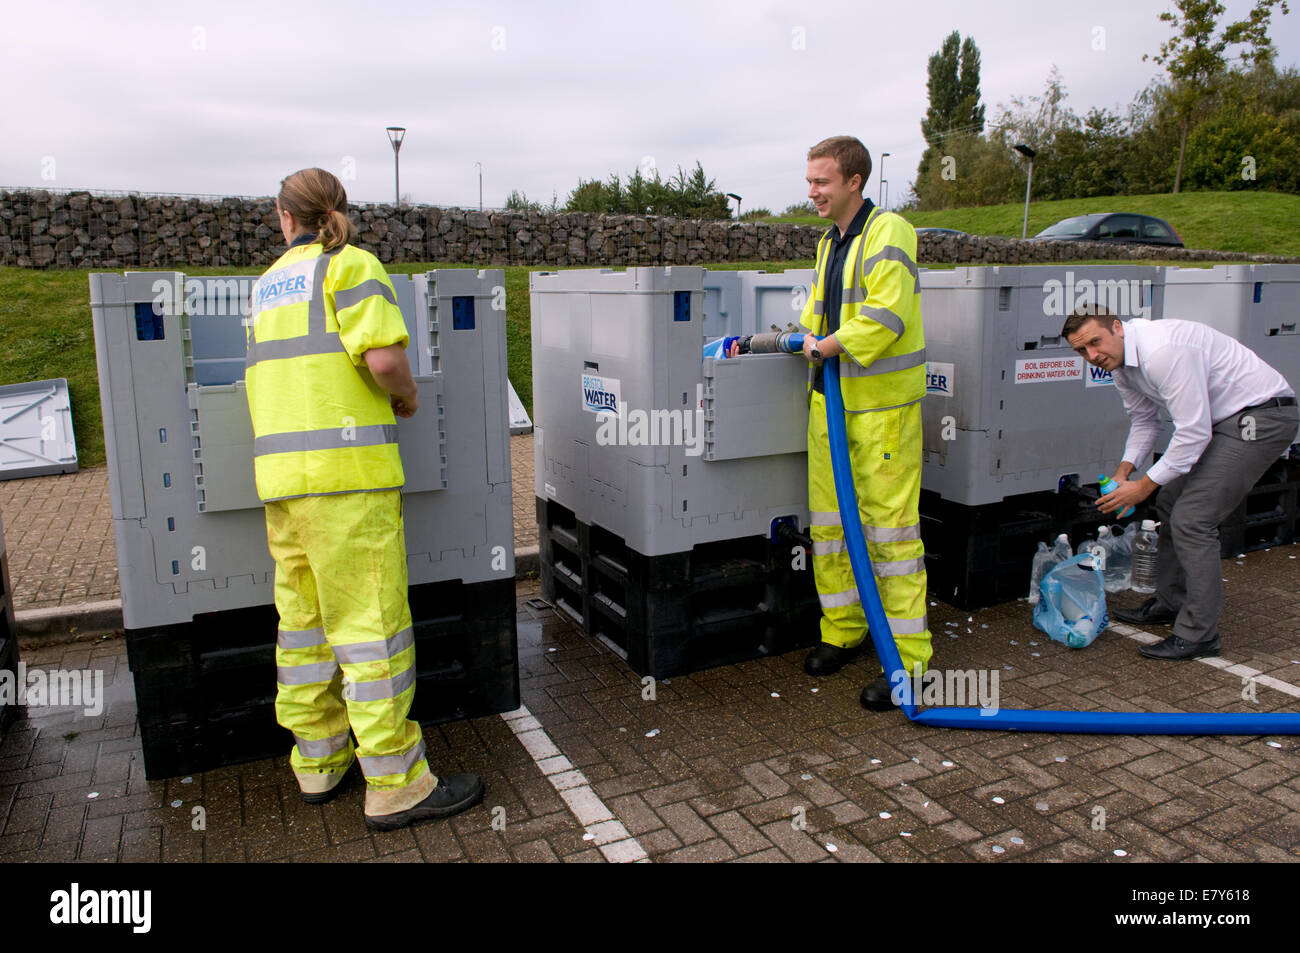 Bristol, UK. 26th Sep, 2014. Bristol water filling water bowsers at Longwell Green, so that local residents can obtain water after being left with no water overnight due to a burst water mains in Fisher Road, Kingswood, Bristol, which is affecting thousands in East Bristol.  Bristol water as yet have no estimated time when service will be restored. Taken 10.30am Sept 26th. Credit:  Rachel Husband/Alamy Live News Stock Photo